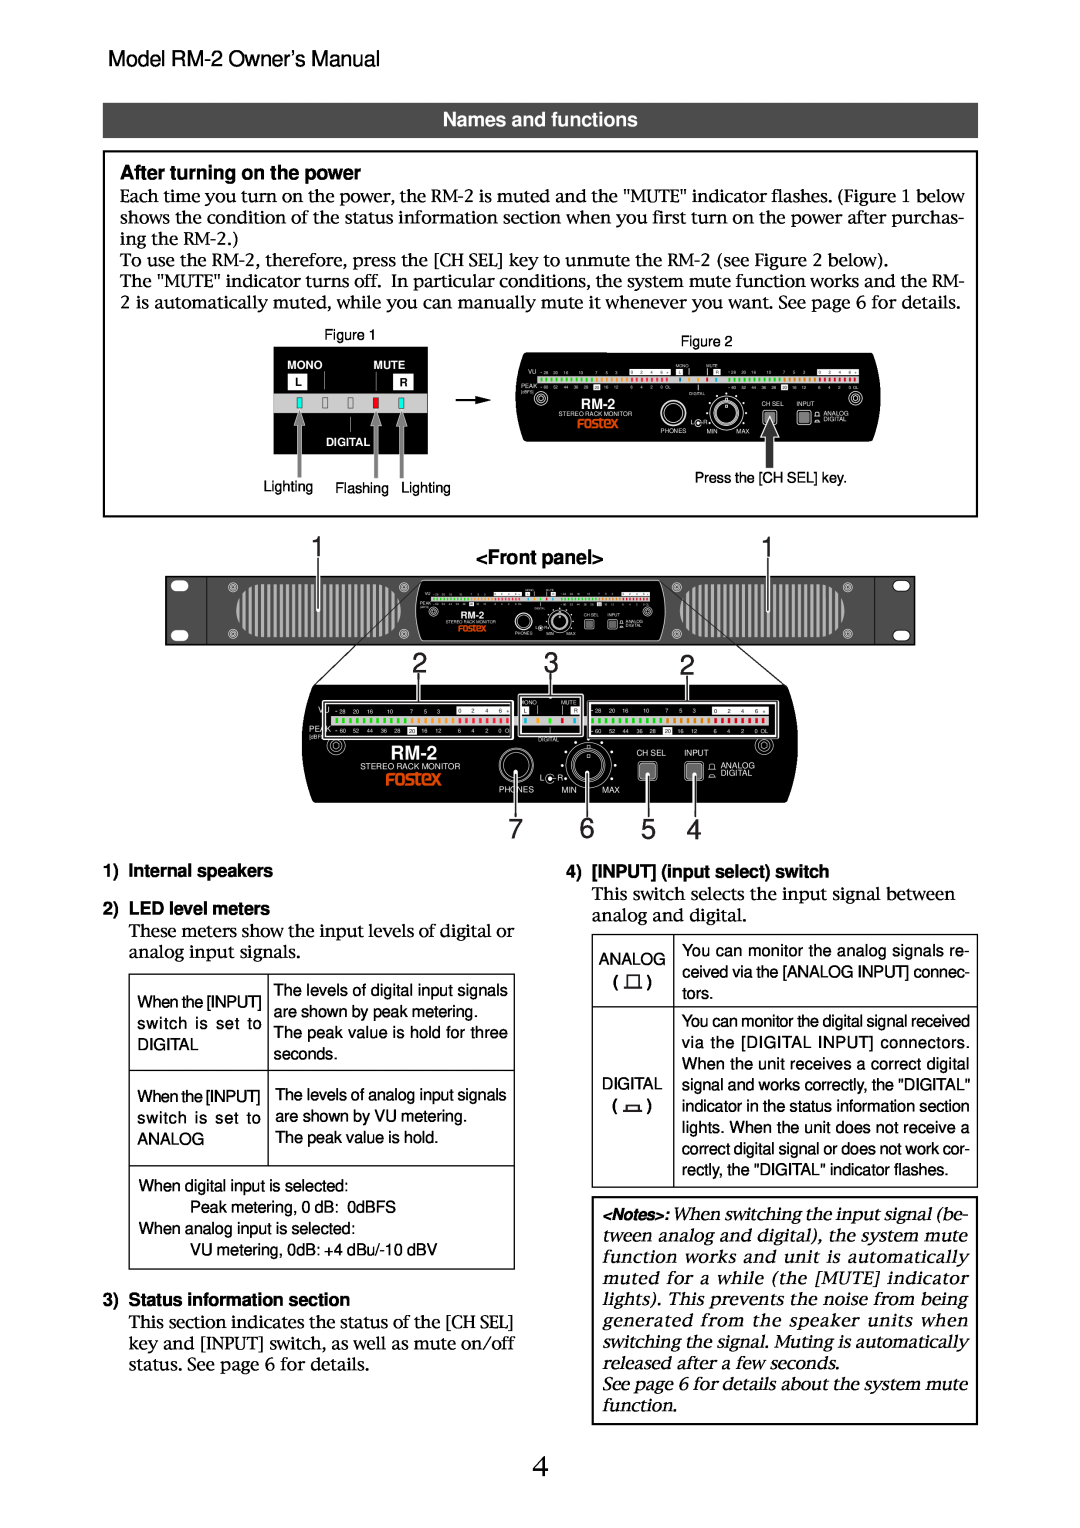 Fostex RM-2 owner manual Names and functions, After turning on the power, Front panel, 1Internal speakers 2LED level meters 